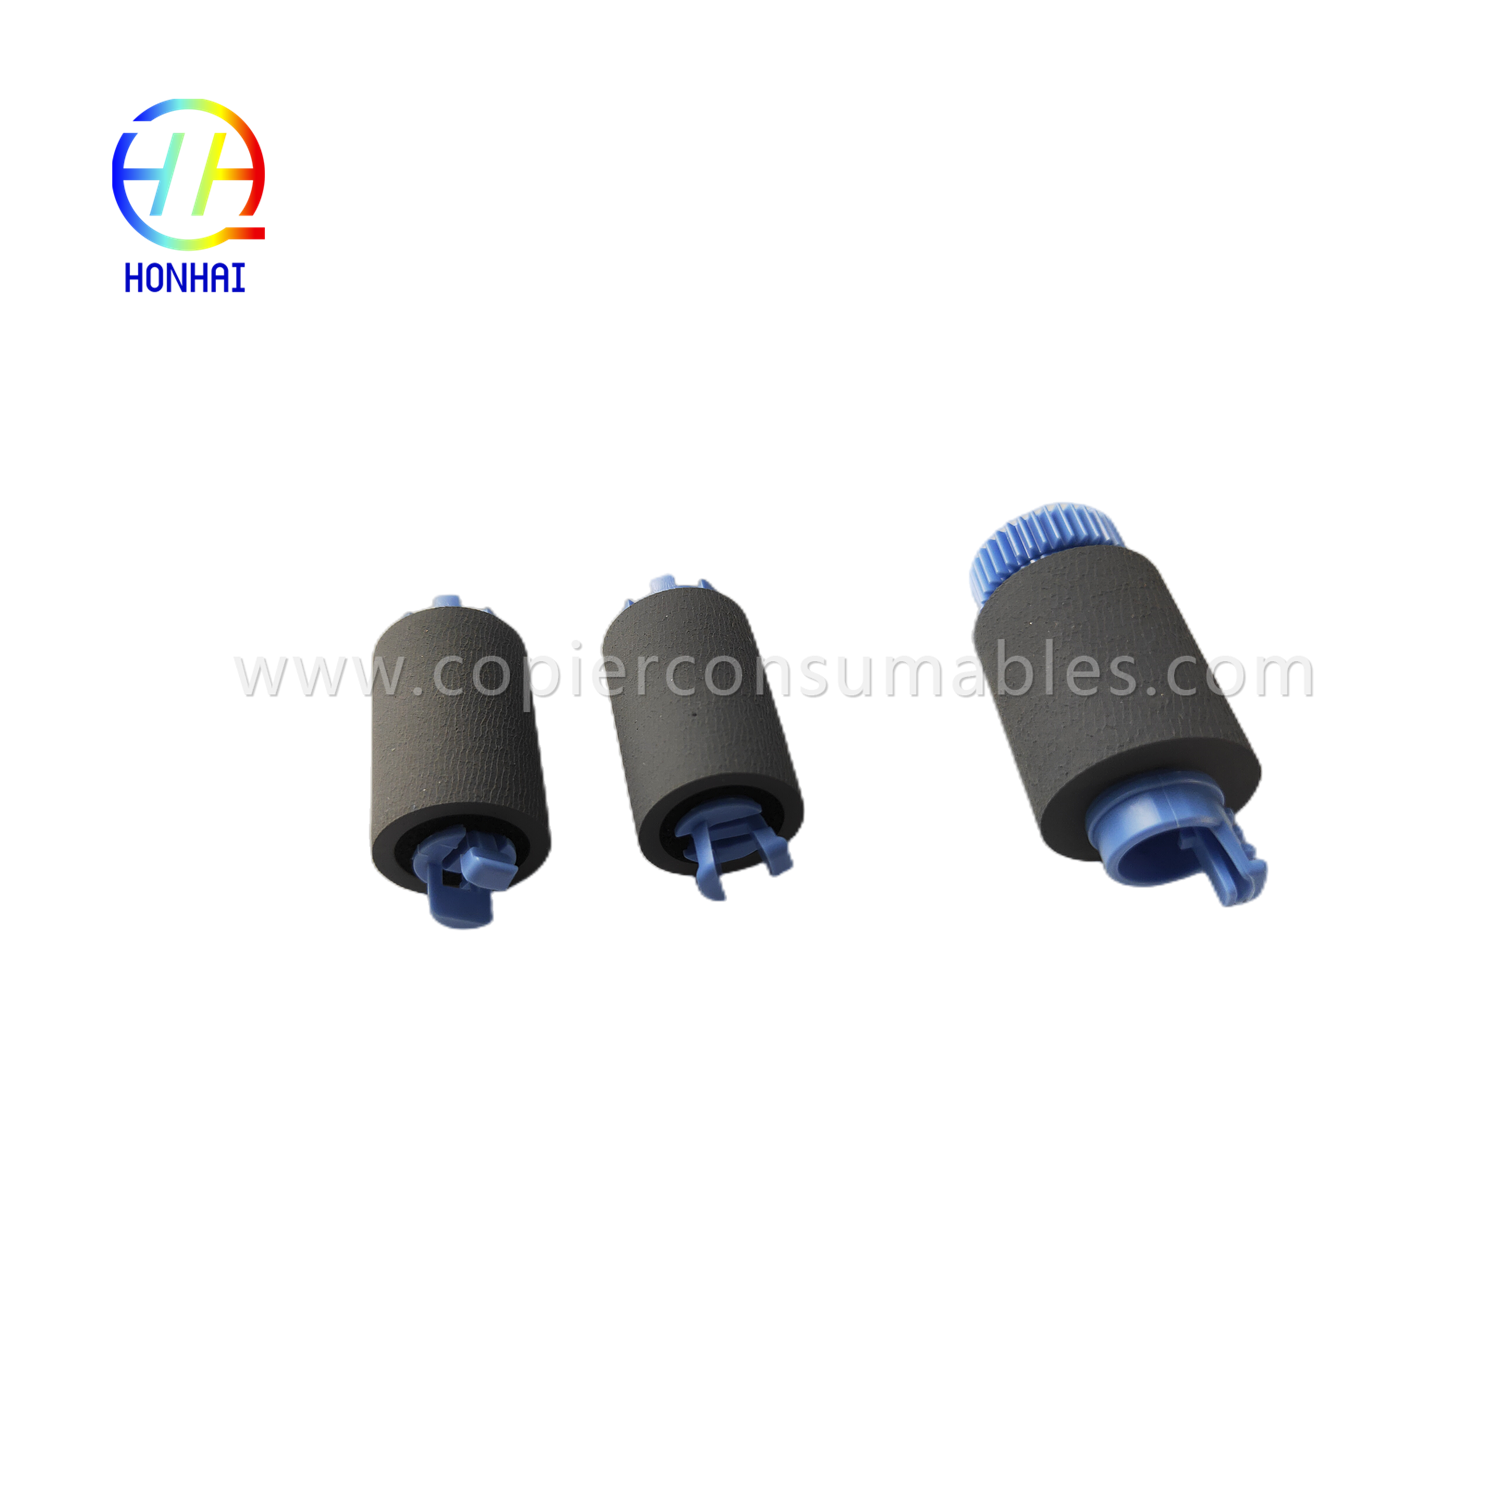 https://www.copierconsumables.com/tray-2-5-pickup-feed-separation-roller-set-for-hp-a7w93-67082-mfp-785f-780dn-e77650z-e77660z-e77650dn-e-7p7n77p p77750z-p77760z-p75050dn-p75050dw-product/